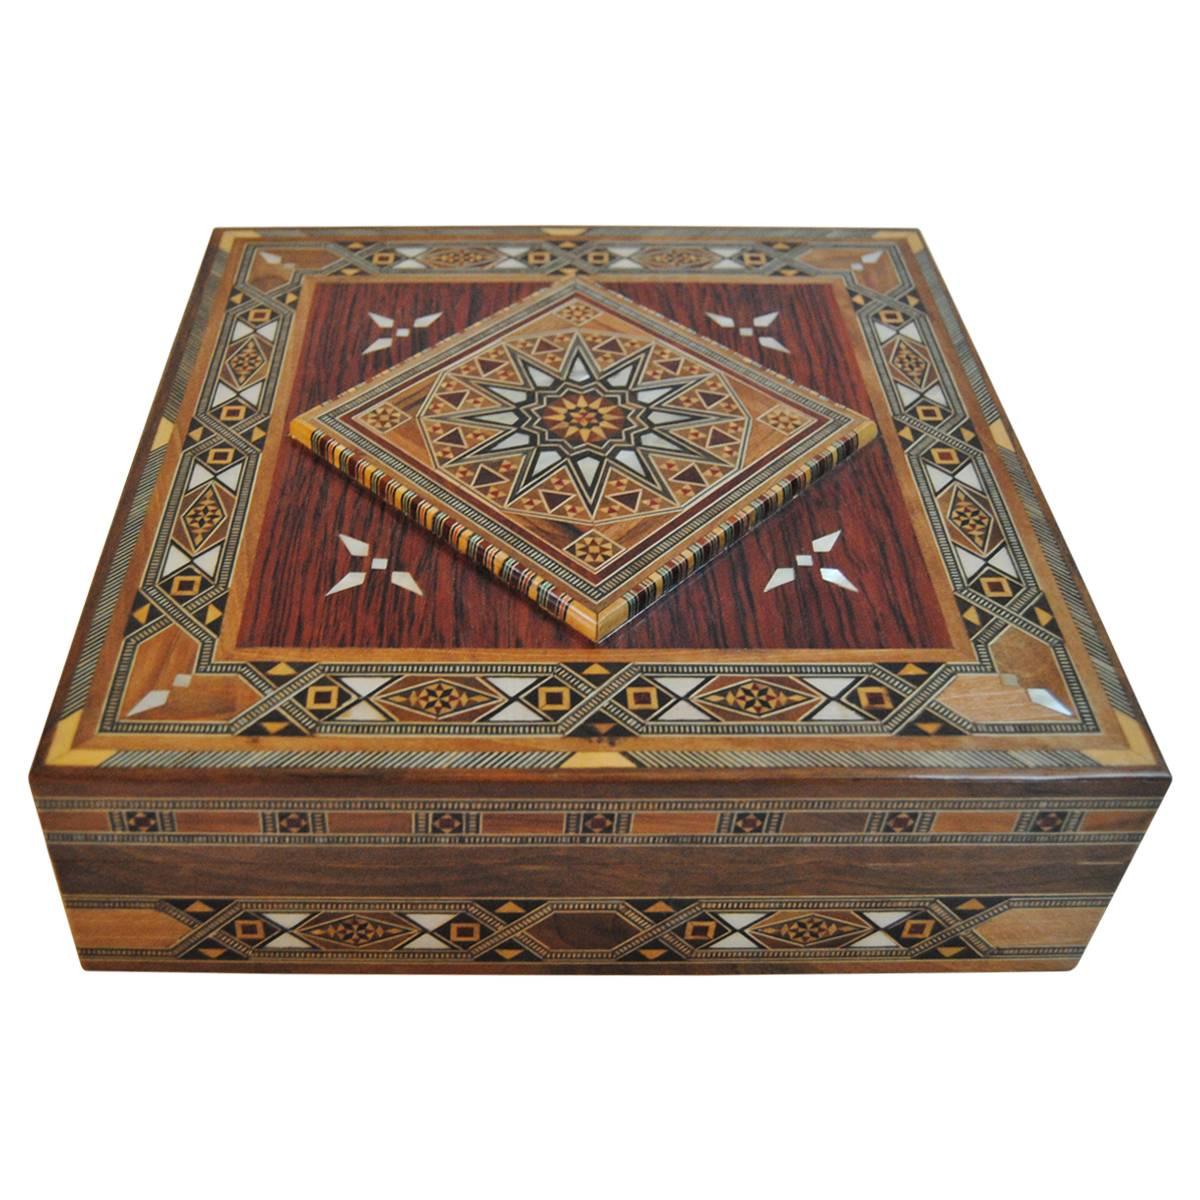 Syrian Walnut Wood Box Inlaid with Mother-of-Pearl, Cream Leather Lining